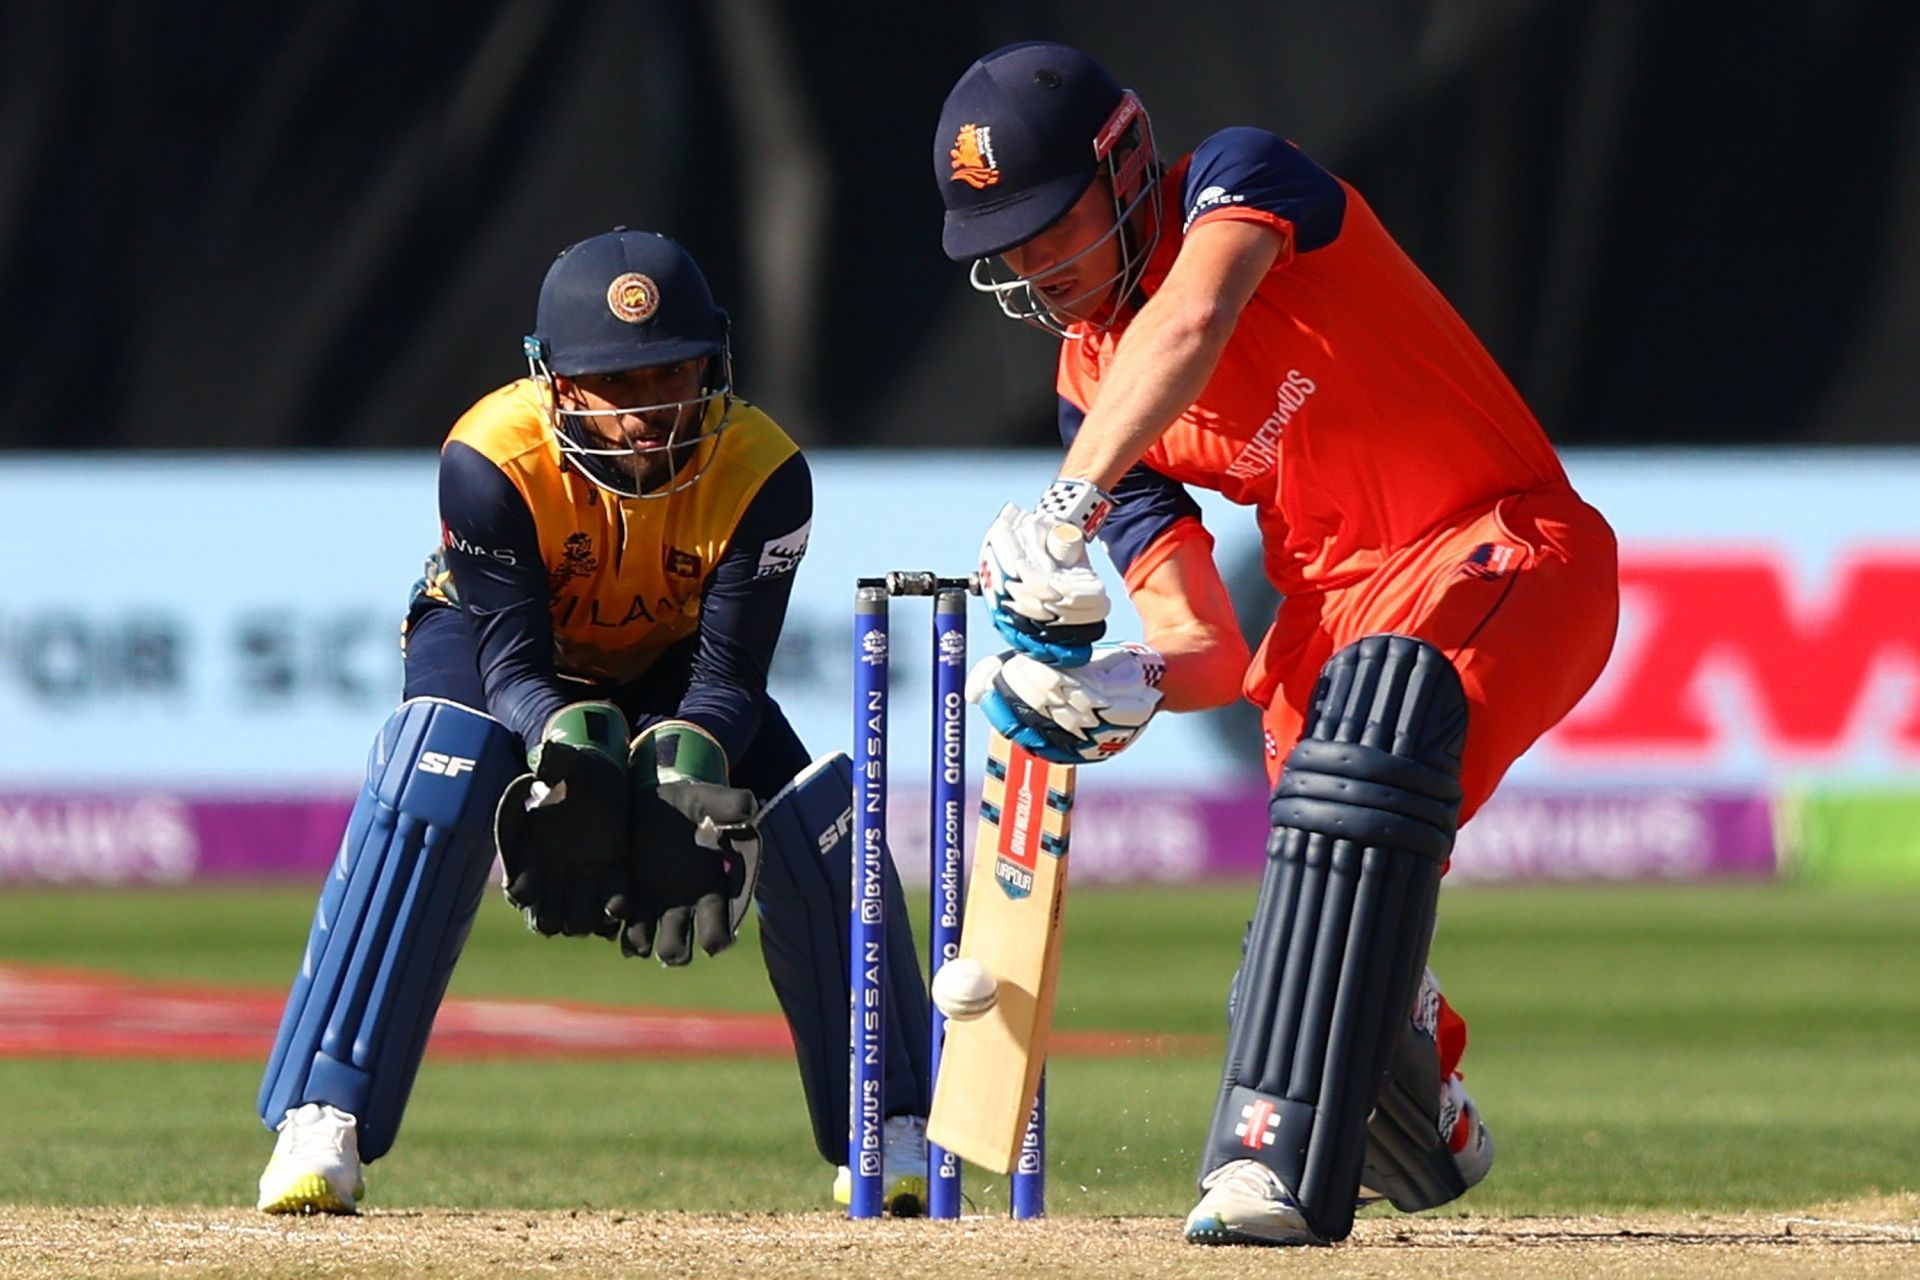 Netherlands qualified for the Super 12 stage despite losing to Sri Lanka. [P/C: T20 World Cup/Twitter]